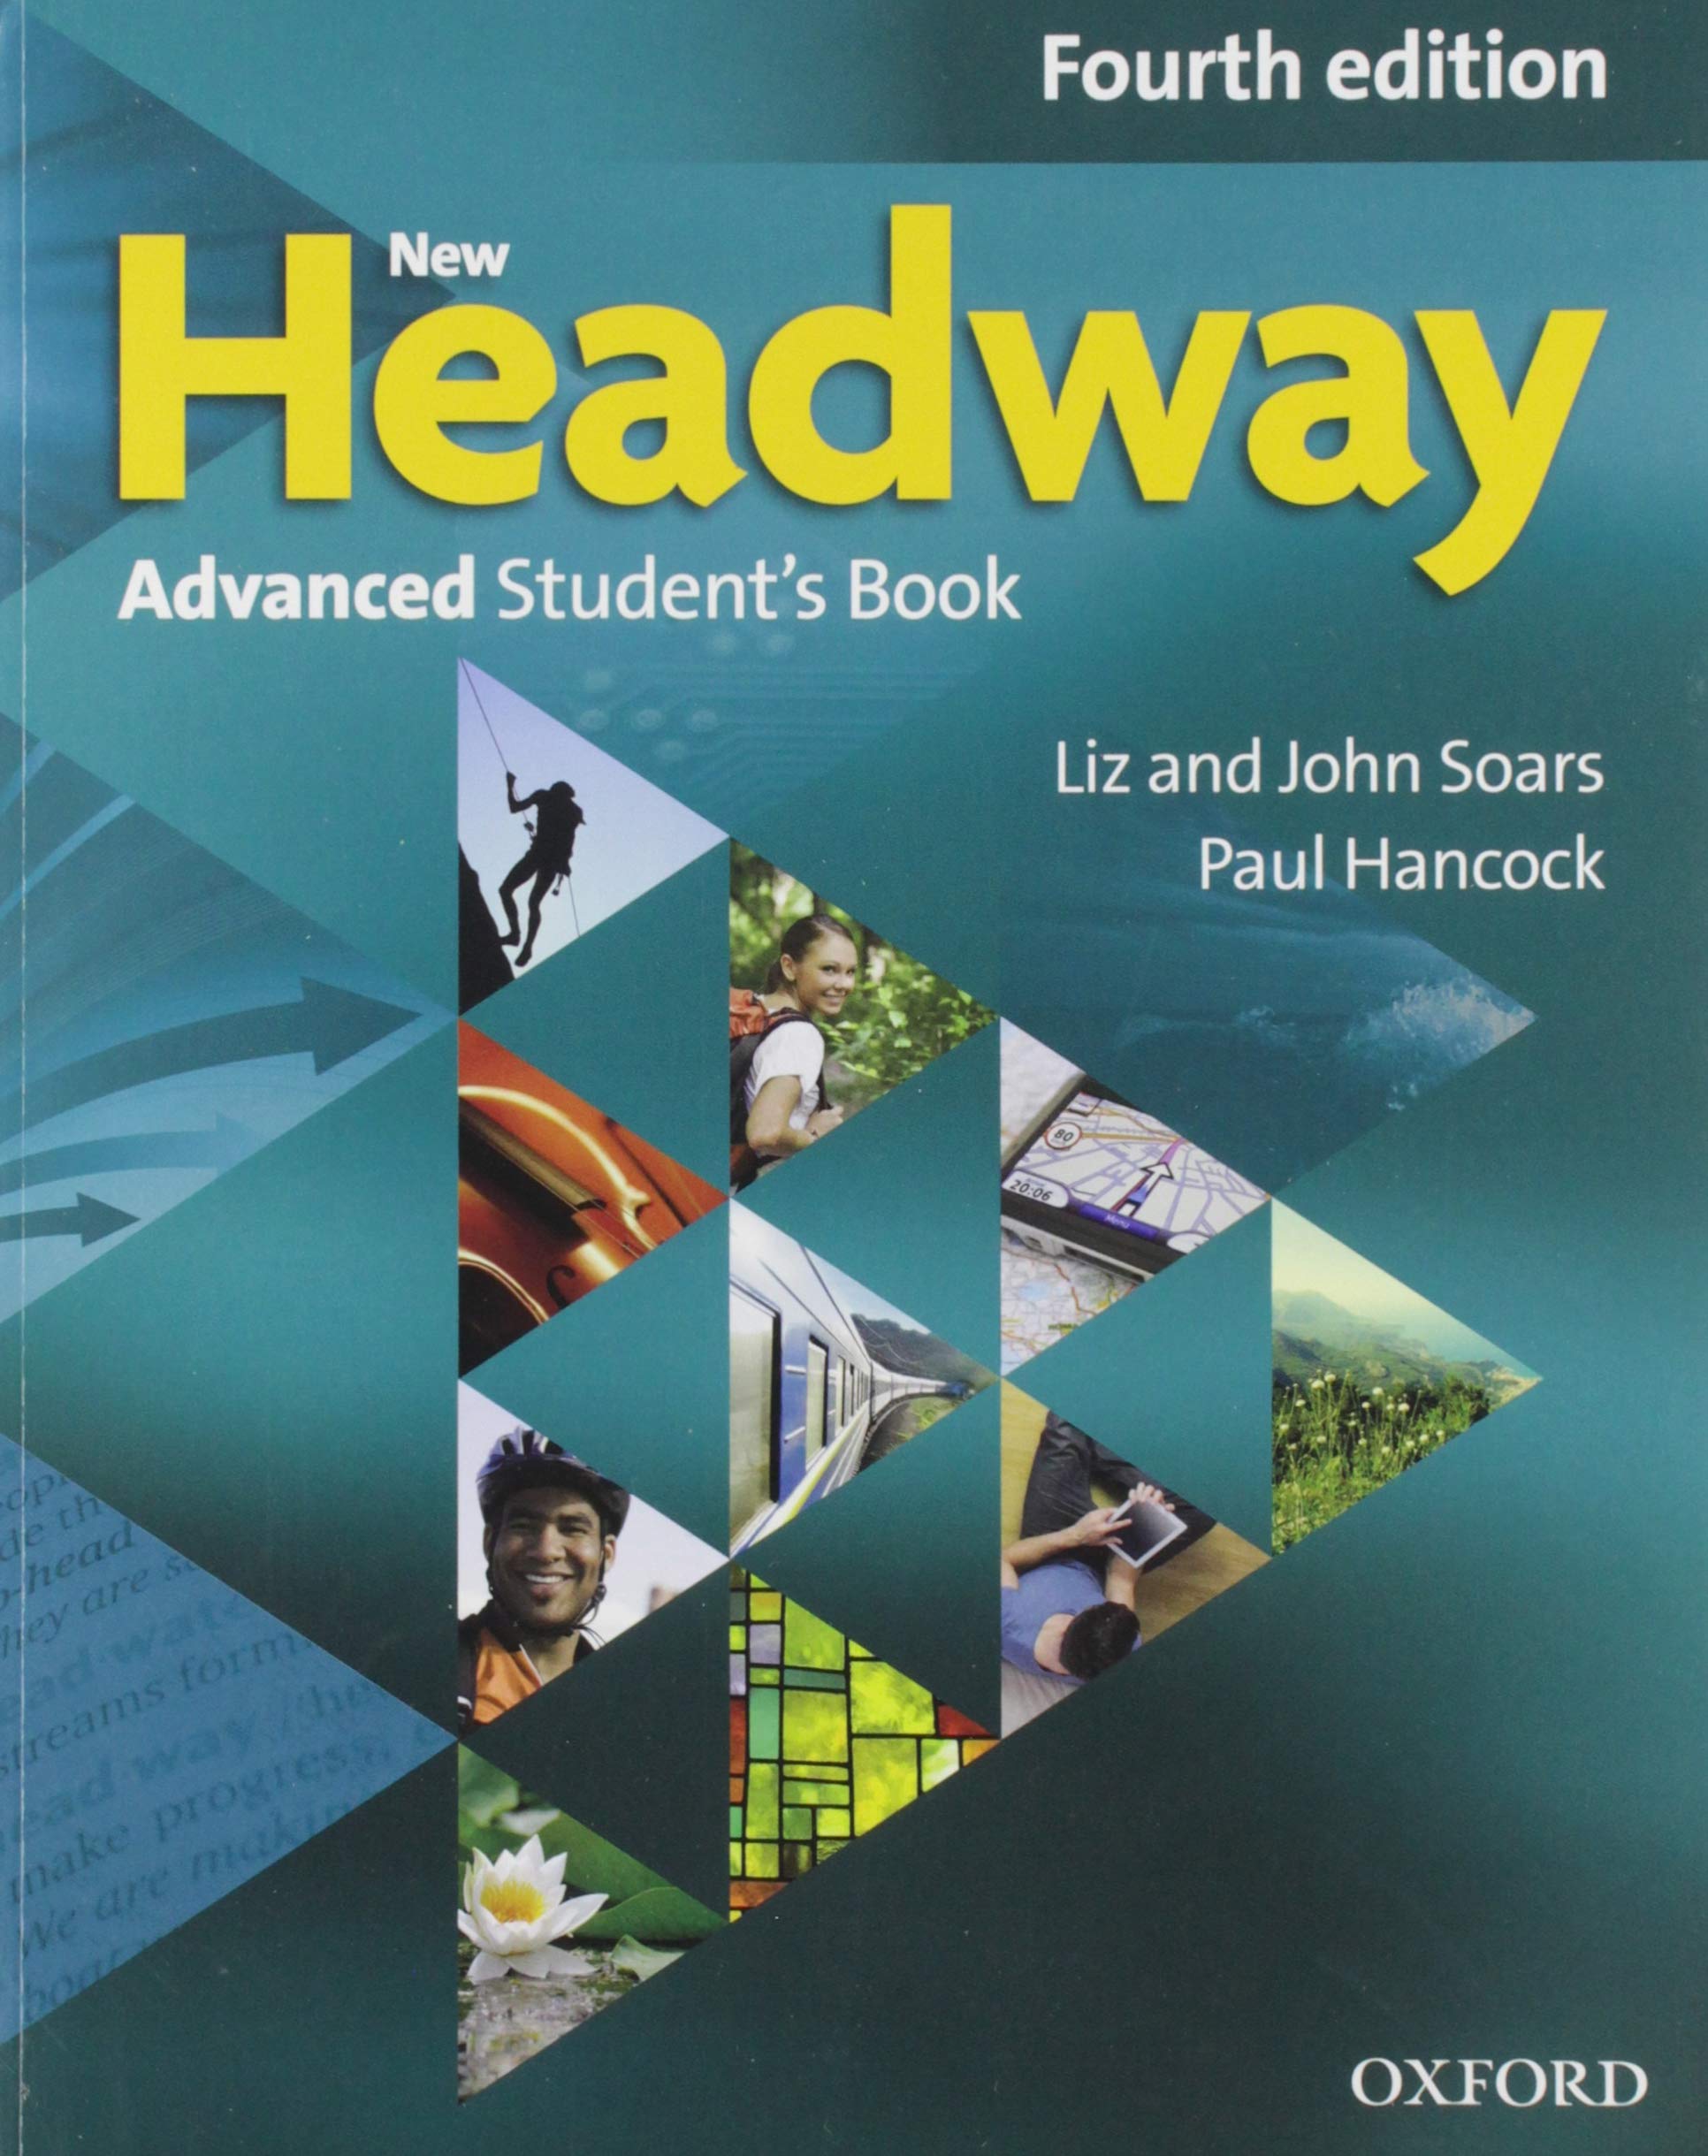 Headway advanced 5th edition. New Headway Advanced 4th. Oxford Headway 4 Edition book. New Headway 4th Edition. New Headway, Oxford.